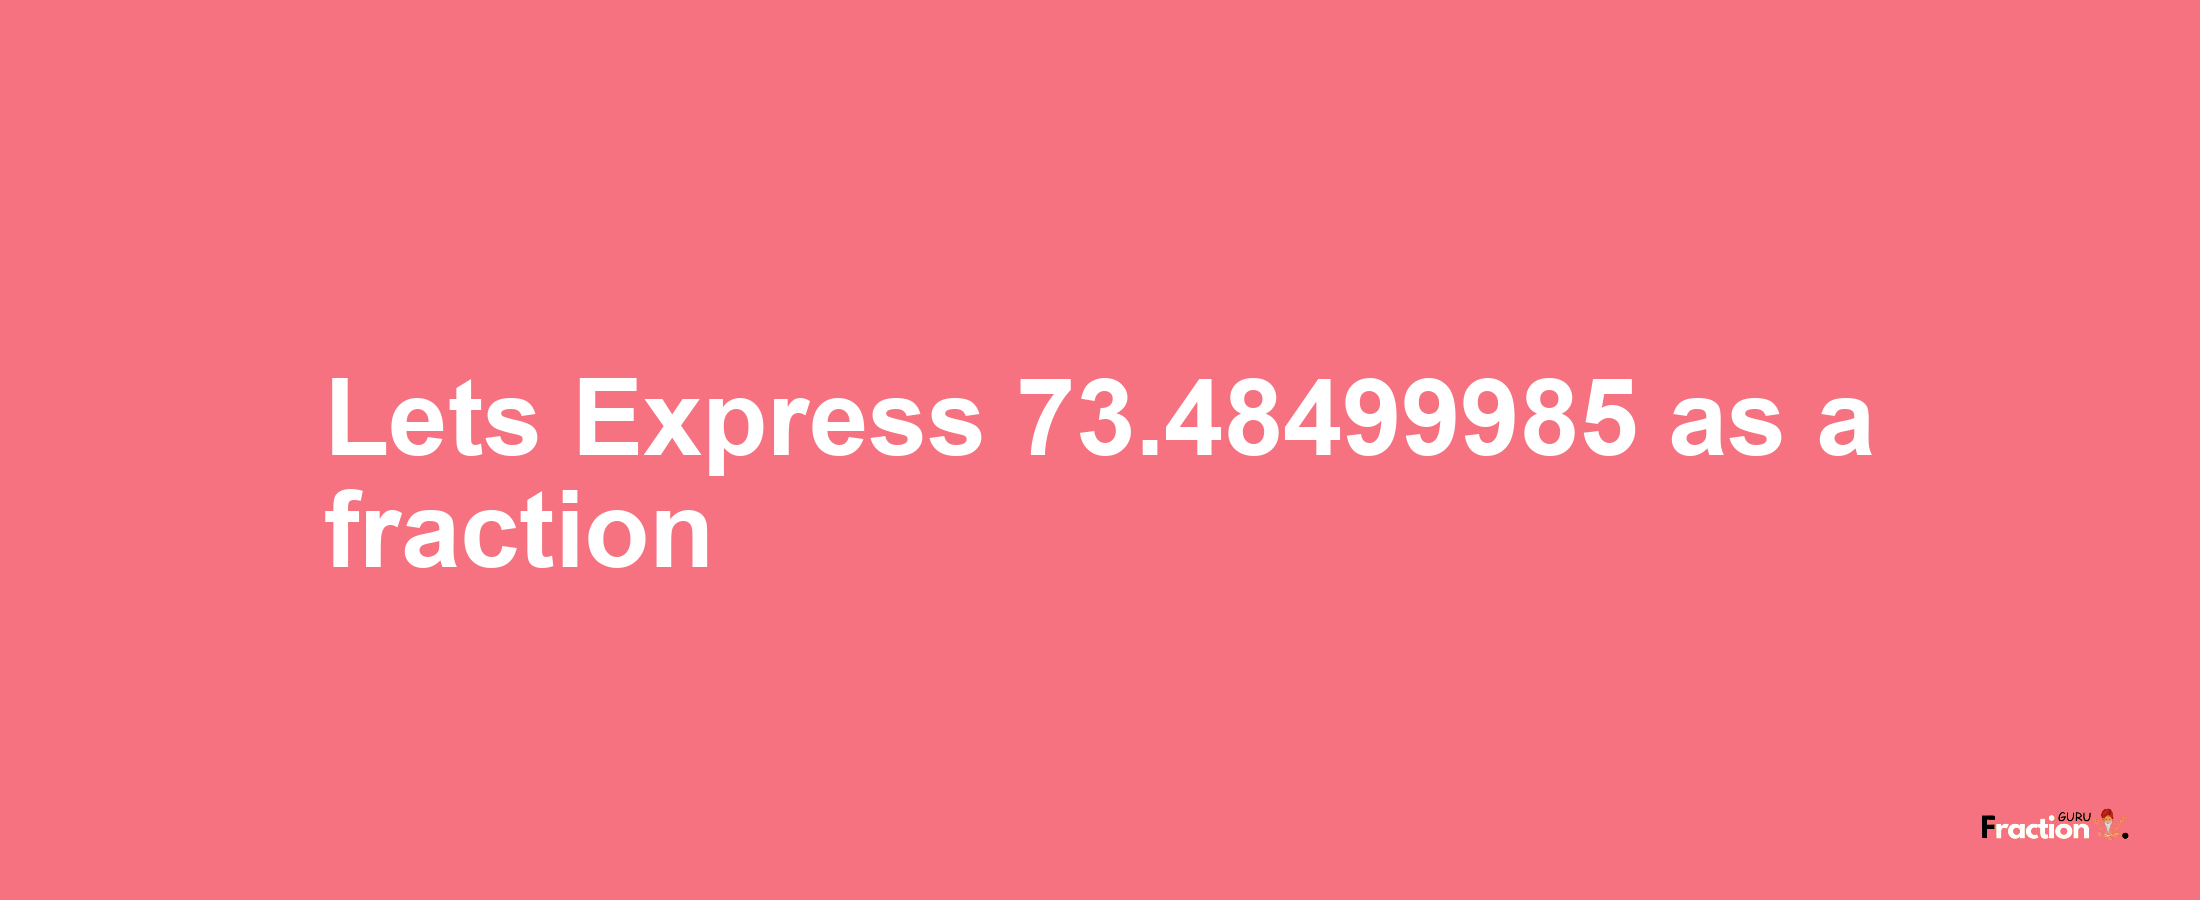 Lets Express 73.48499985 as afraction